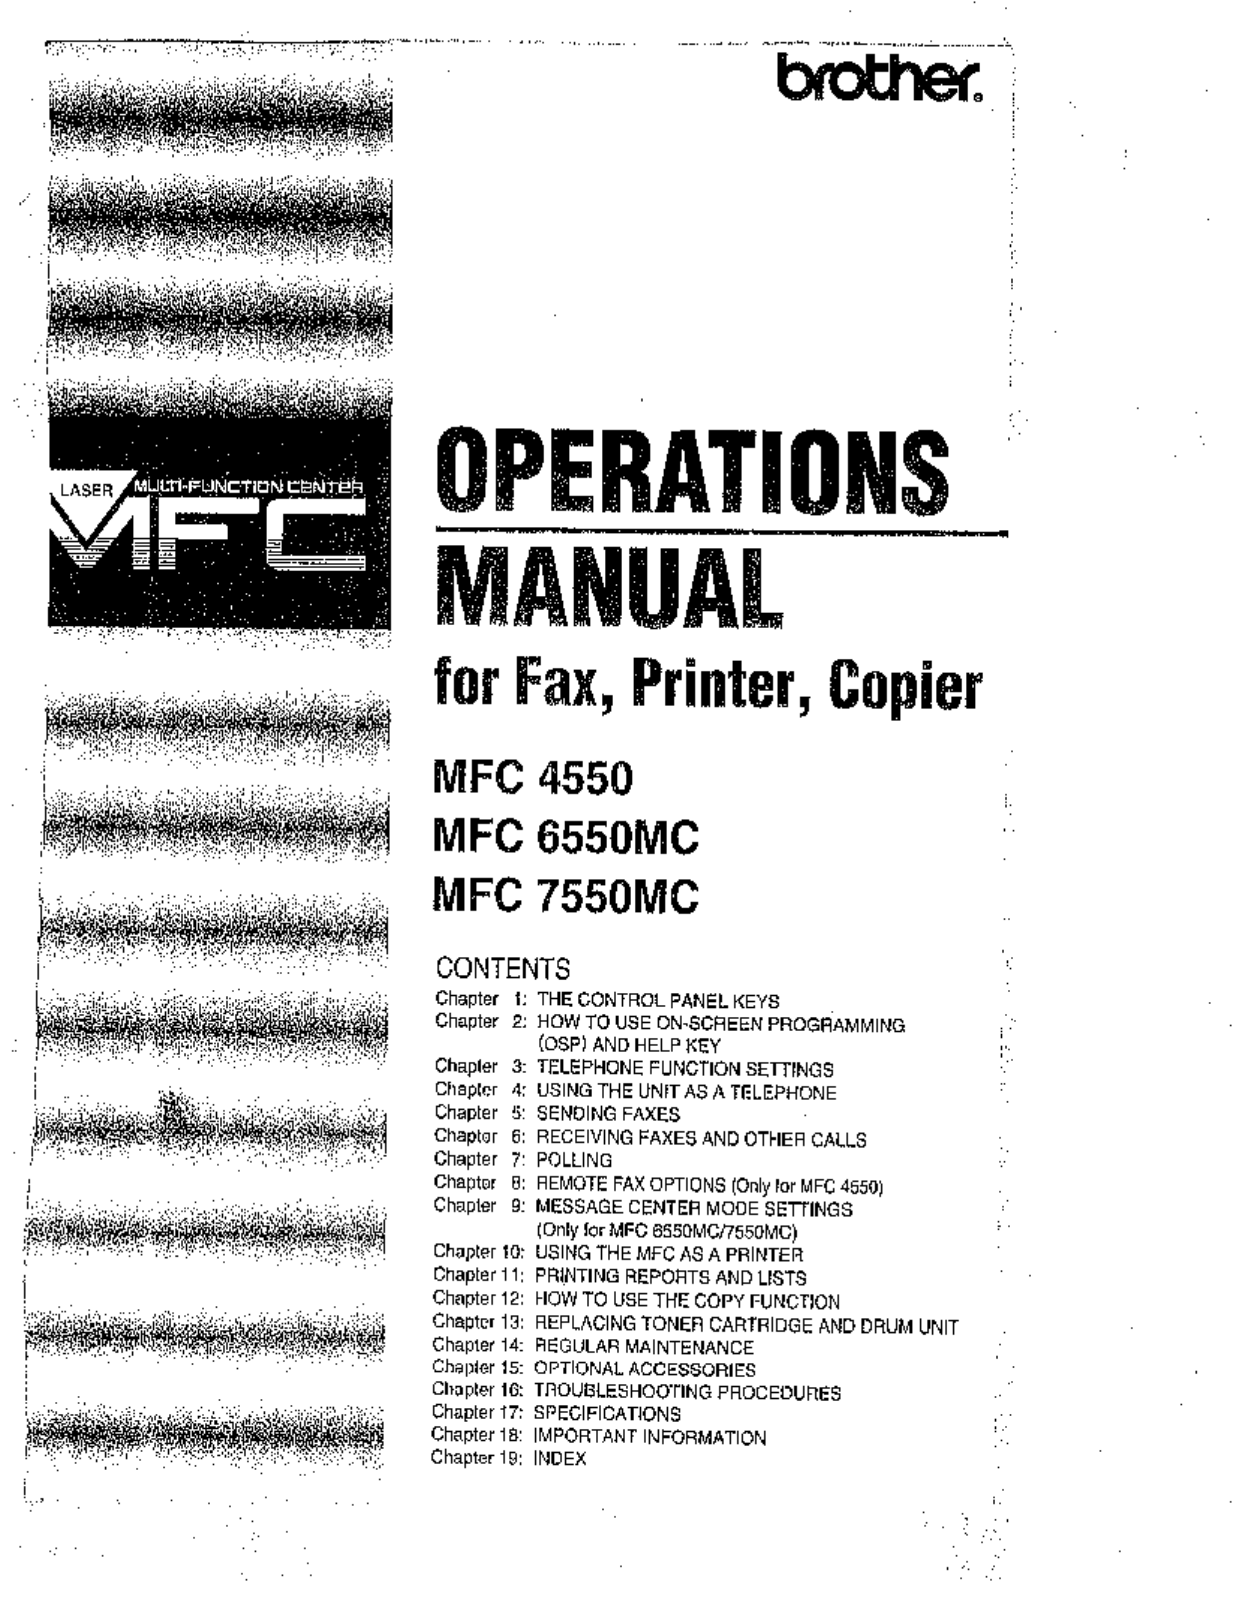 Brother MFC-4550 User Manual